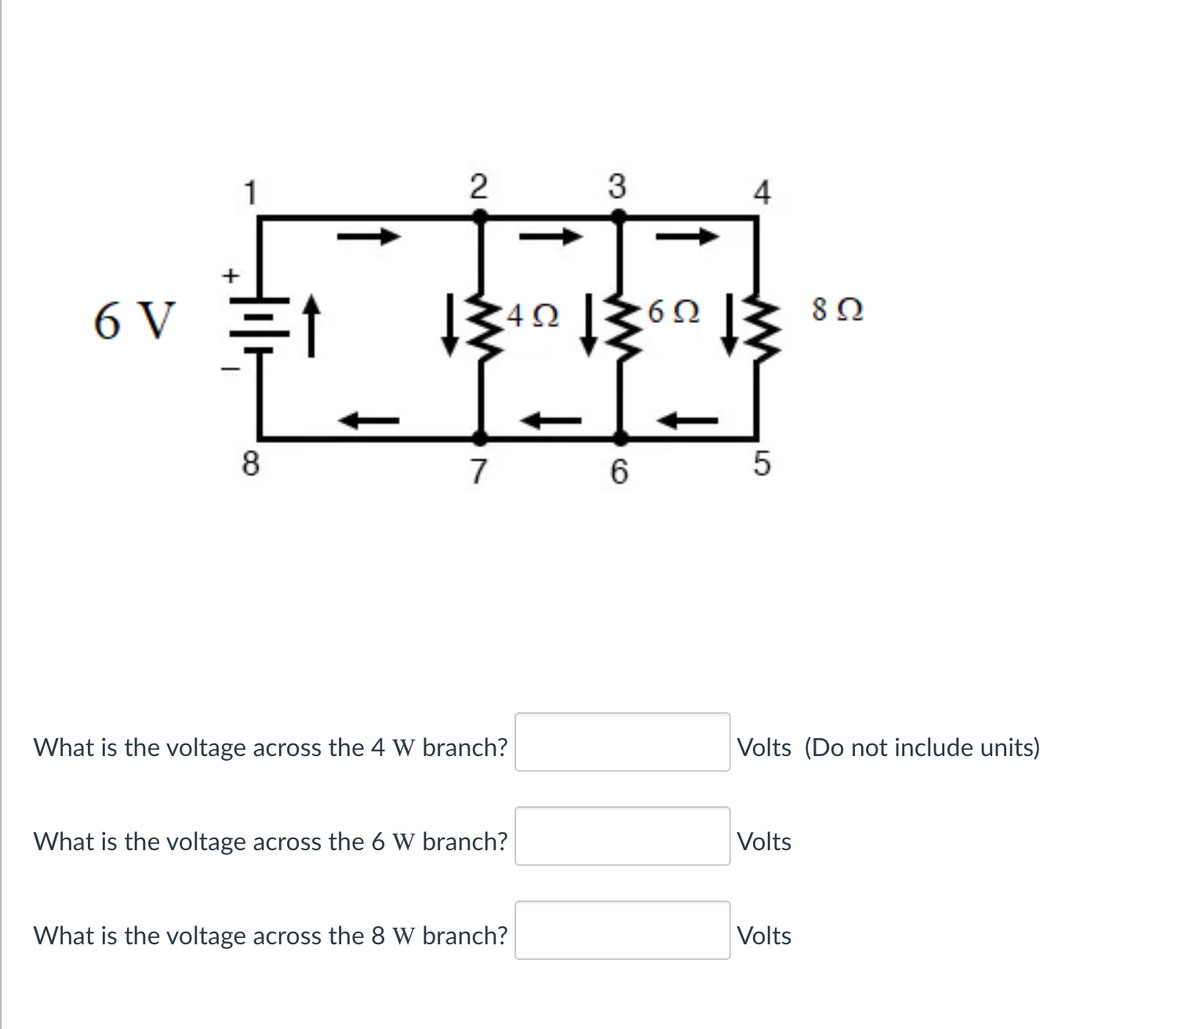 1
2
3
4
6 V
4Ω
6Ω
8Ω
8
7
What is the voltage across the 4 W branch?
Volts (Do not include units)
What is the voltage across the 6 W branch?
Volts
What is the voltage across the 8 W branch?
Volts
